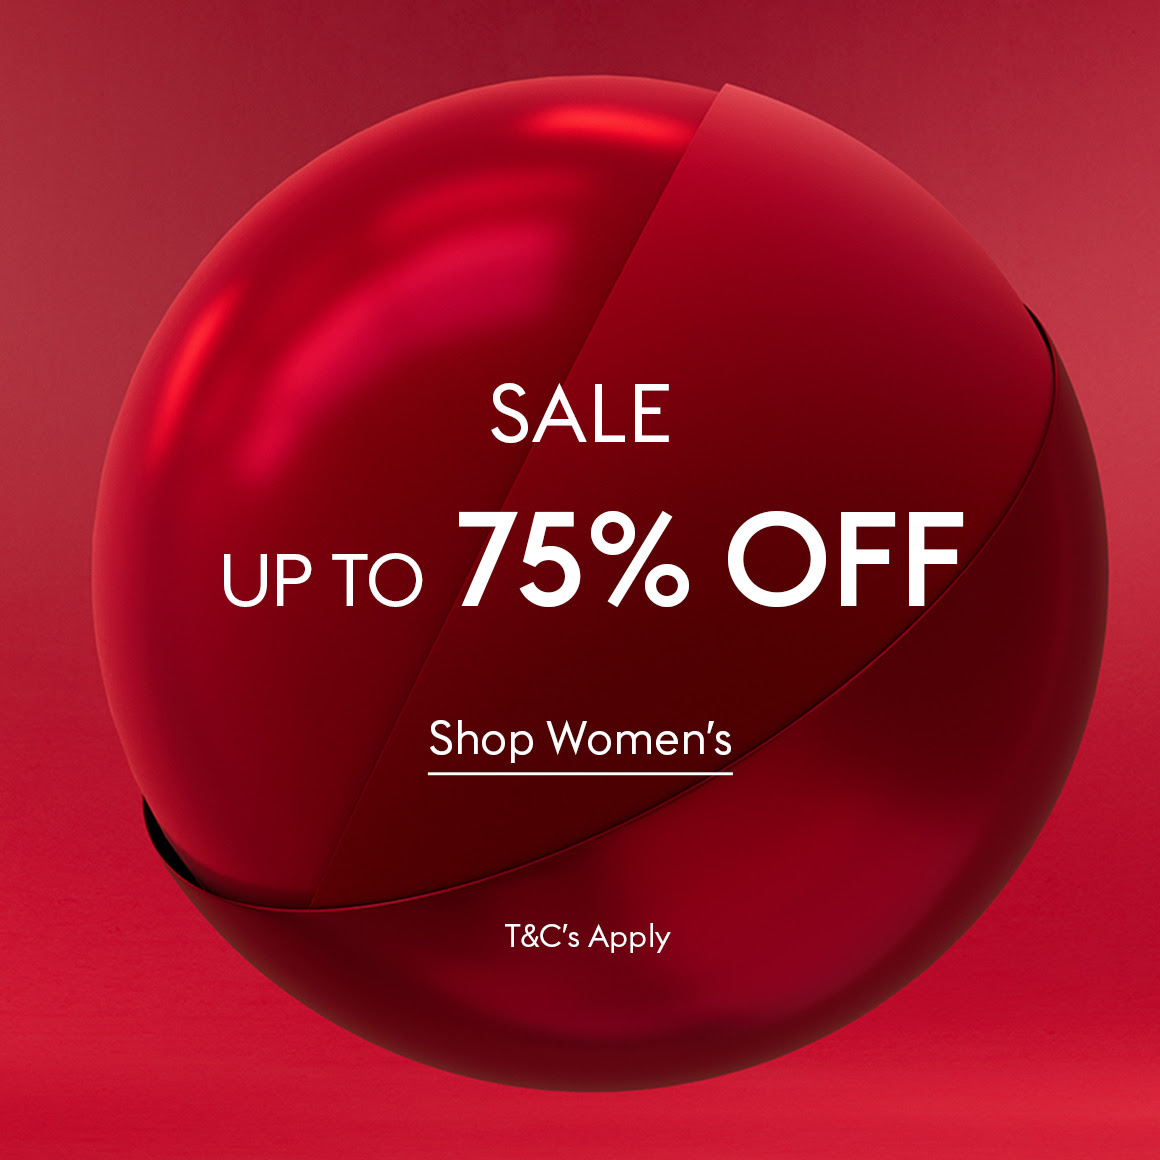 Up to 75% off sale at The Outnet